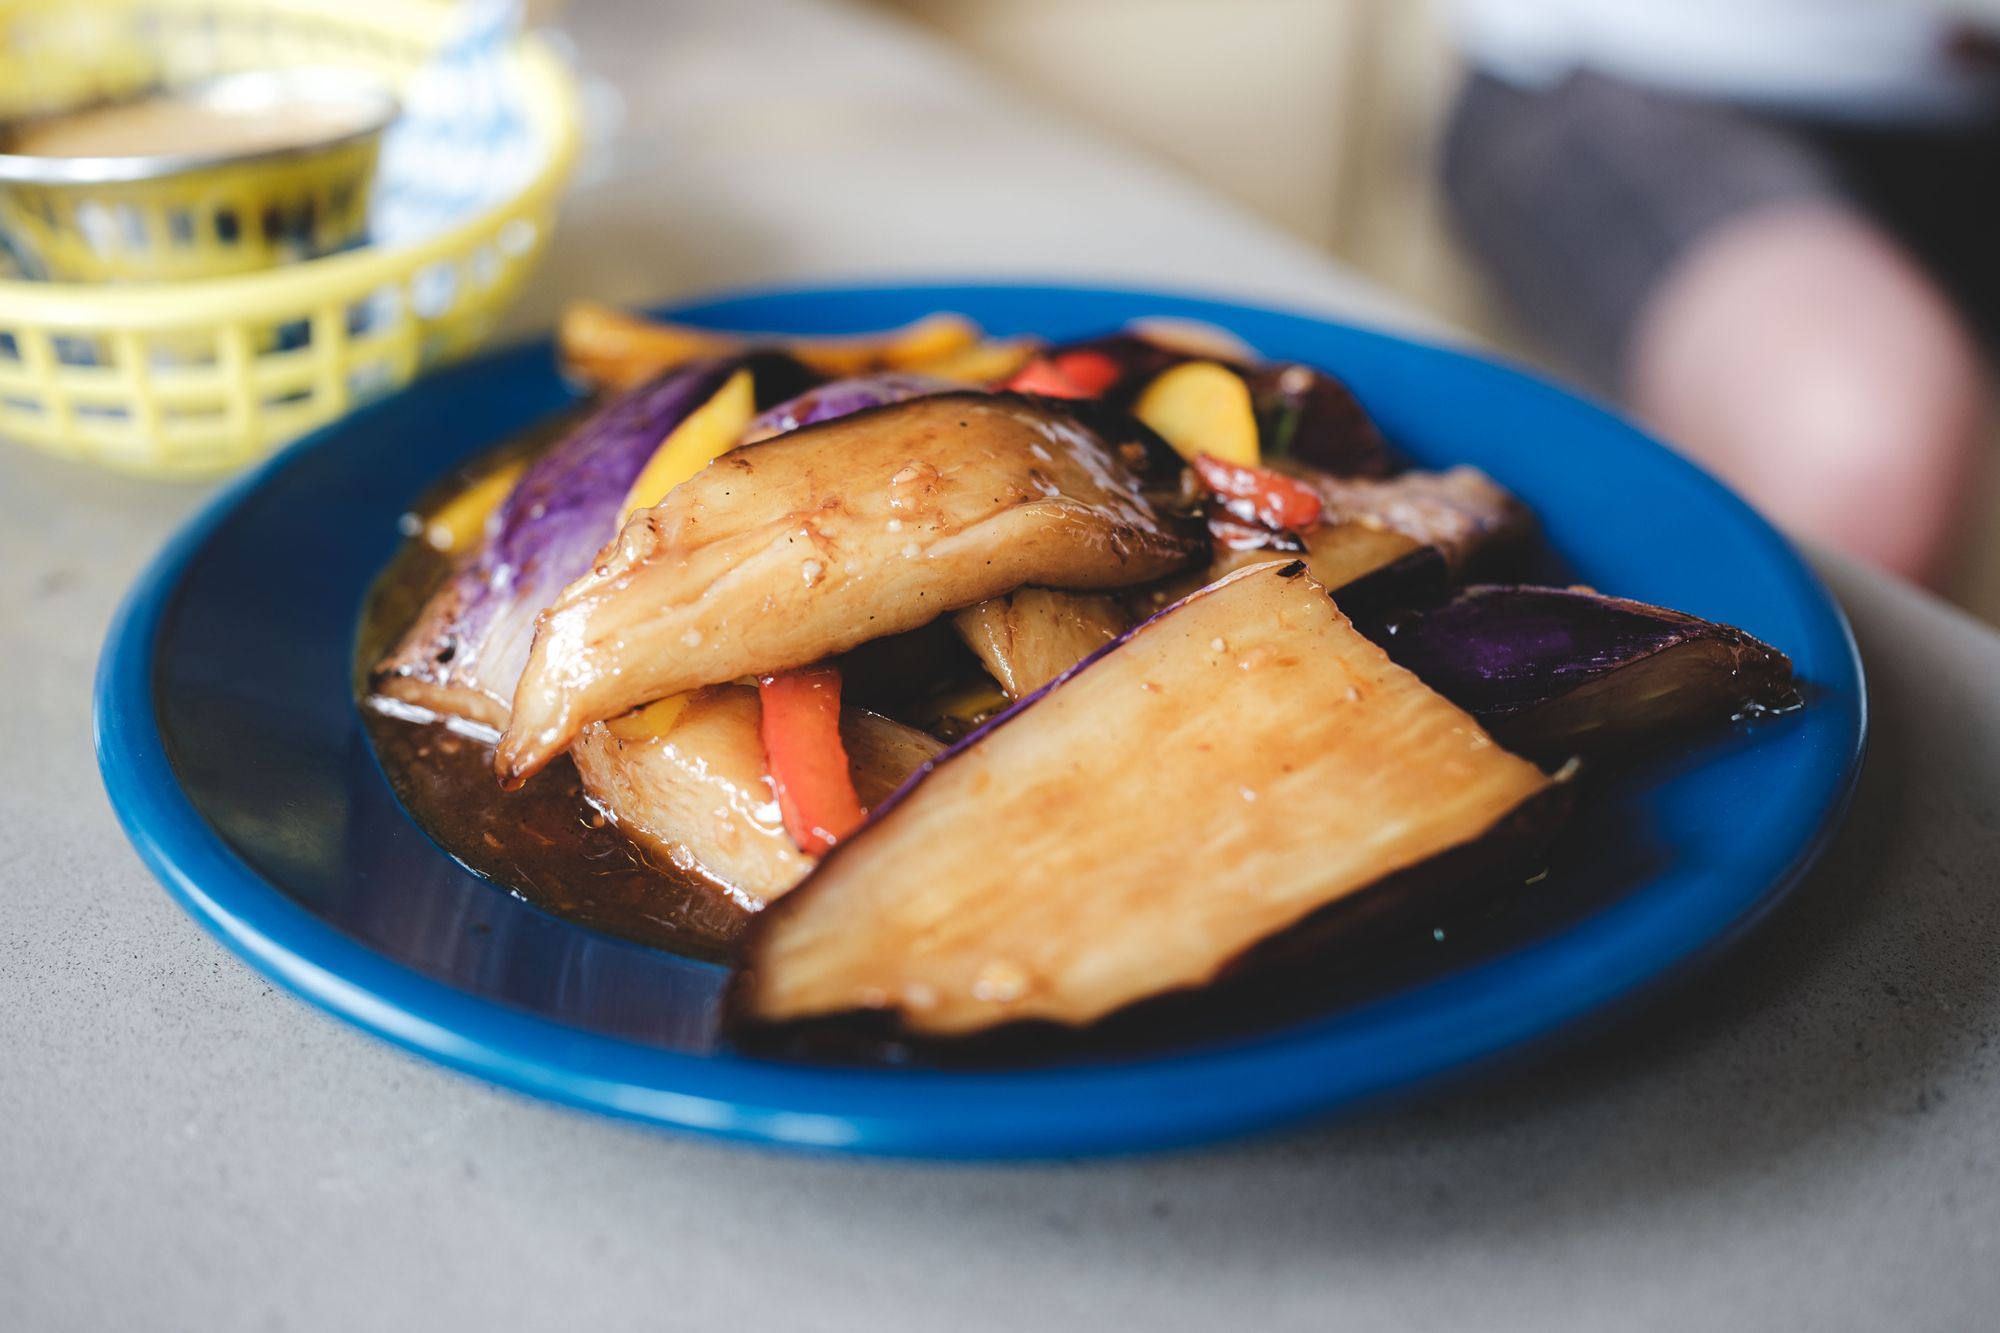 Potluck Hawker Eatery in Vancouver – Wok-Fried Eggplant